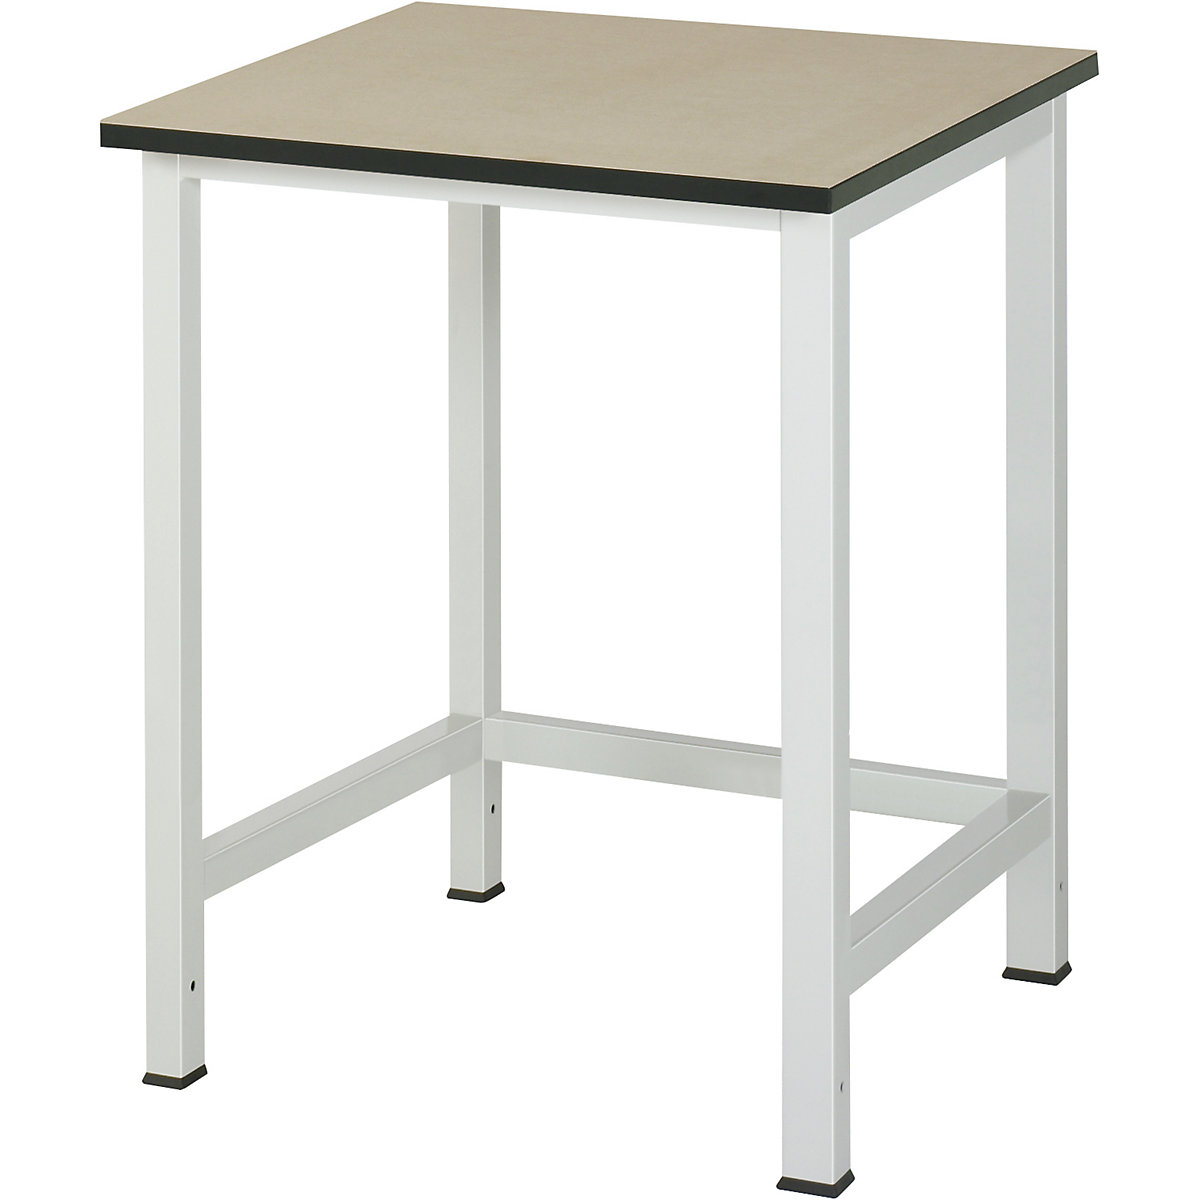 Work table for Series 900 workplace system - RAU